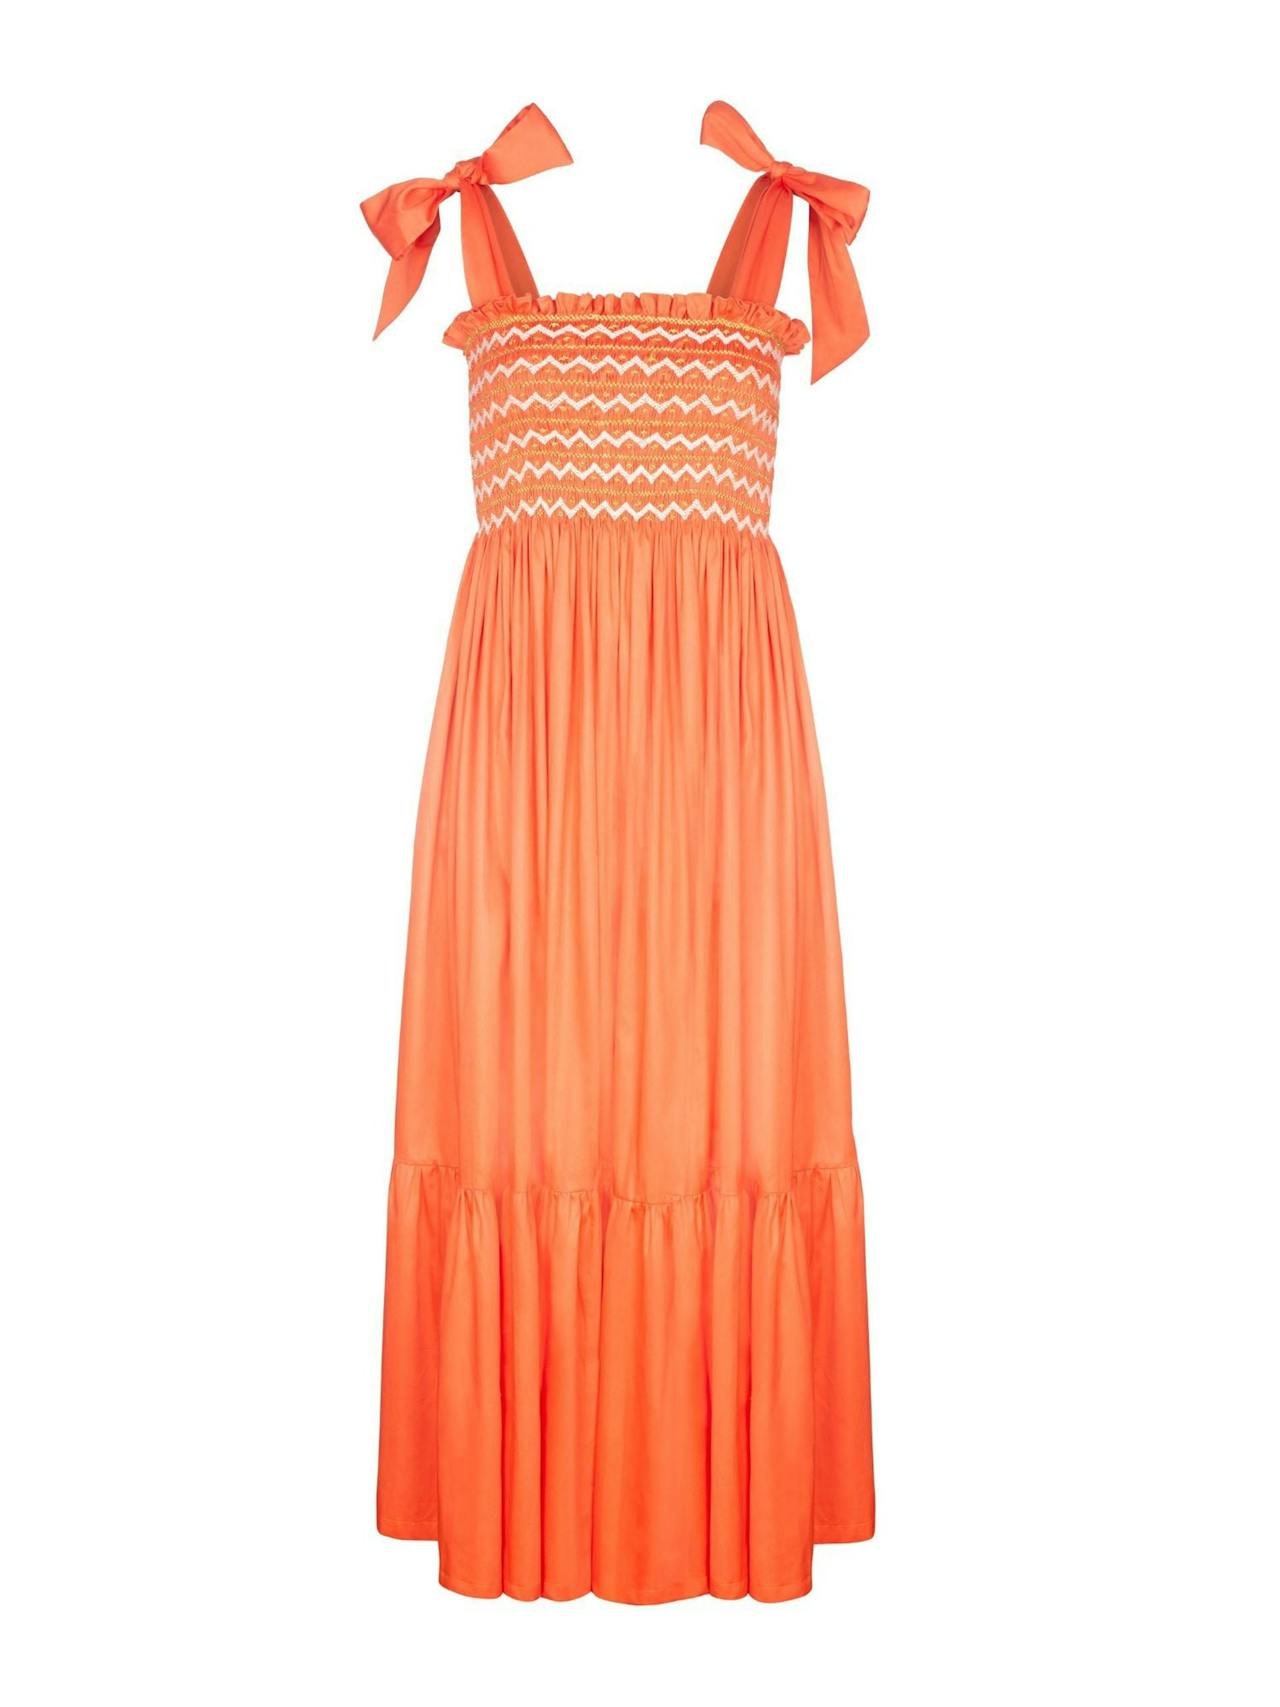 Grace Hopper tangerine dreams dress with gold hand smocking